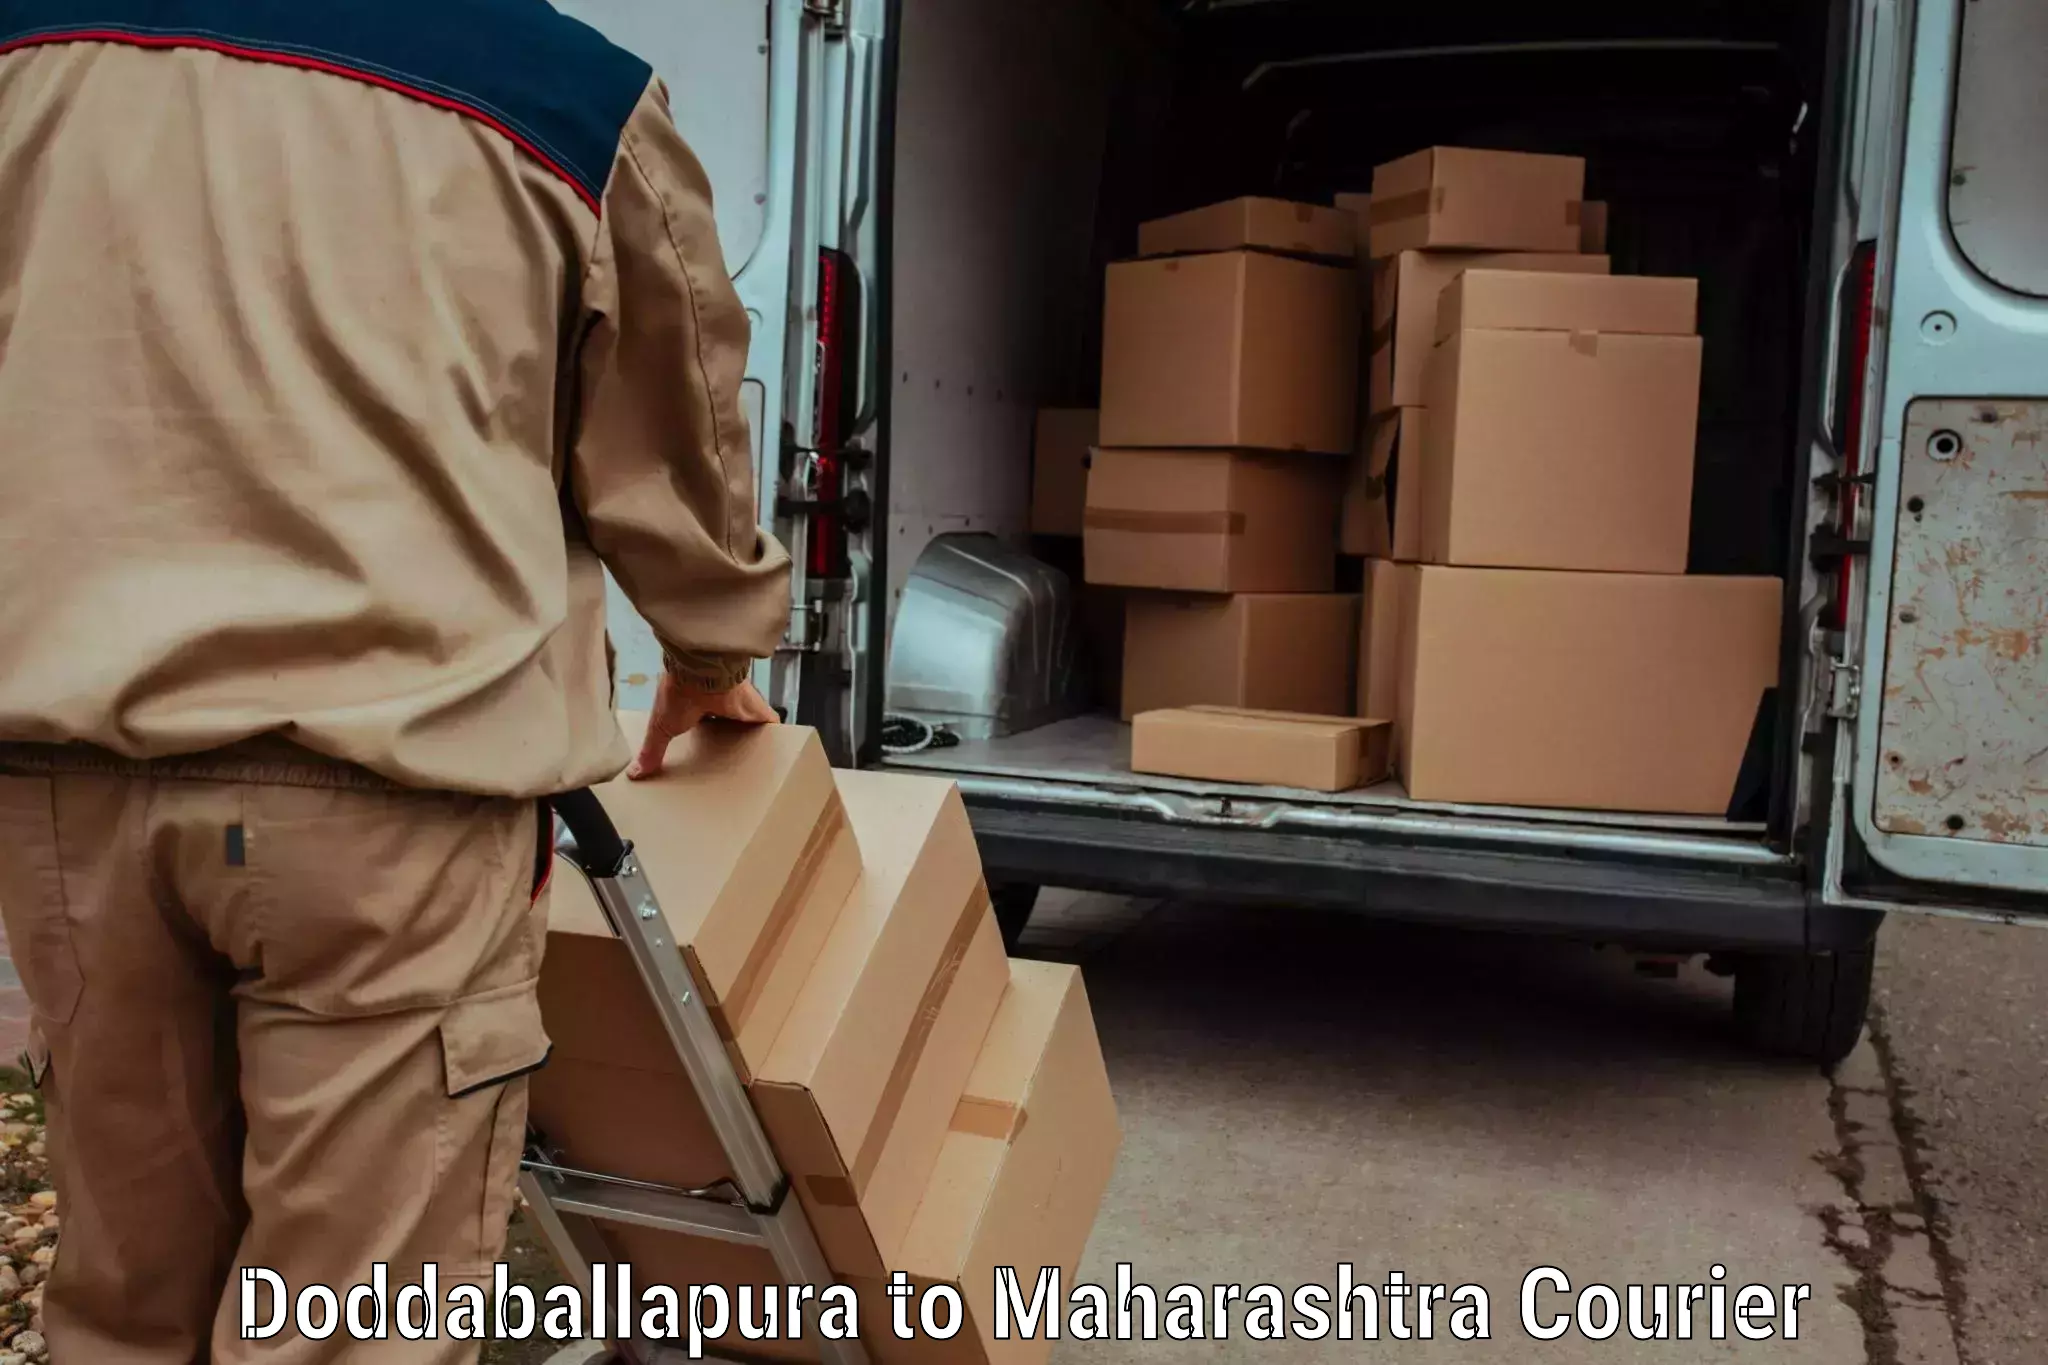 Holiday shipping services Doddaballapura to SVKMs Narsee Monjee Institute of Management Studies Mumbai